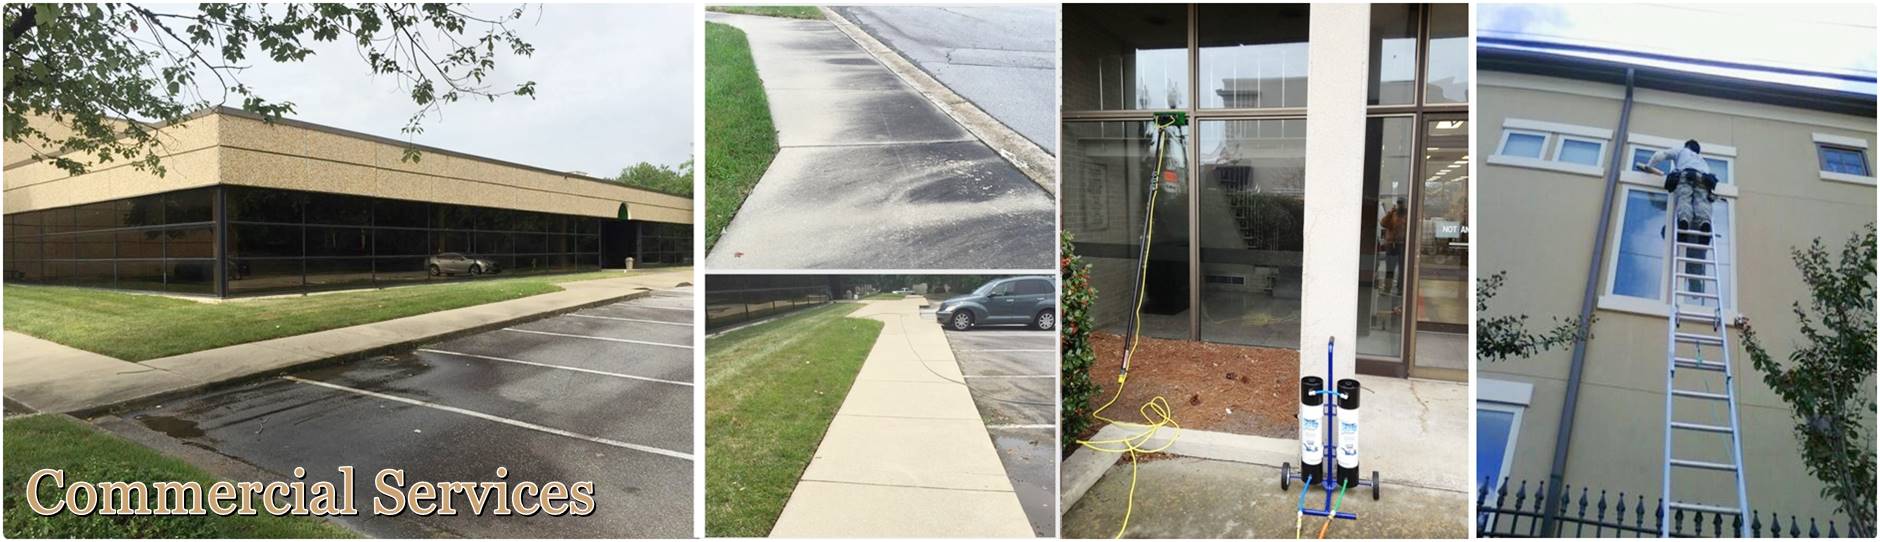 commerical pressure washing services raleigh, nc 